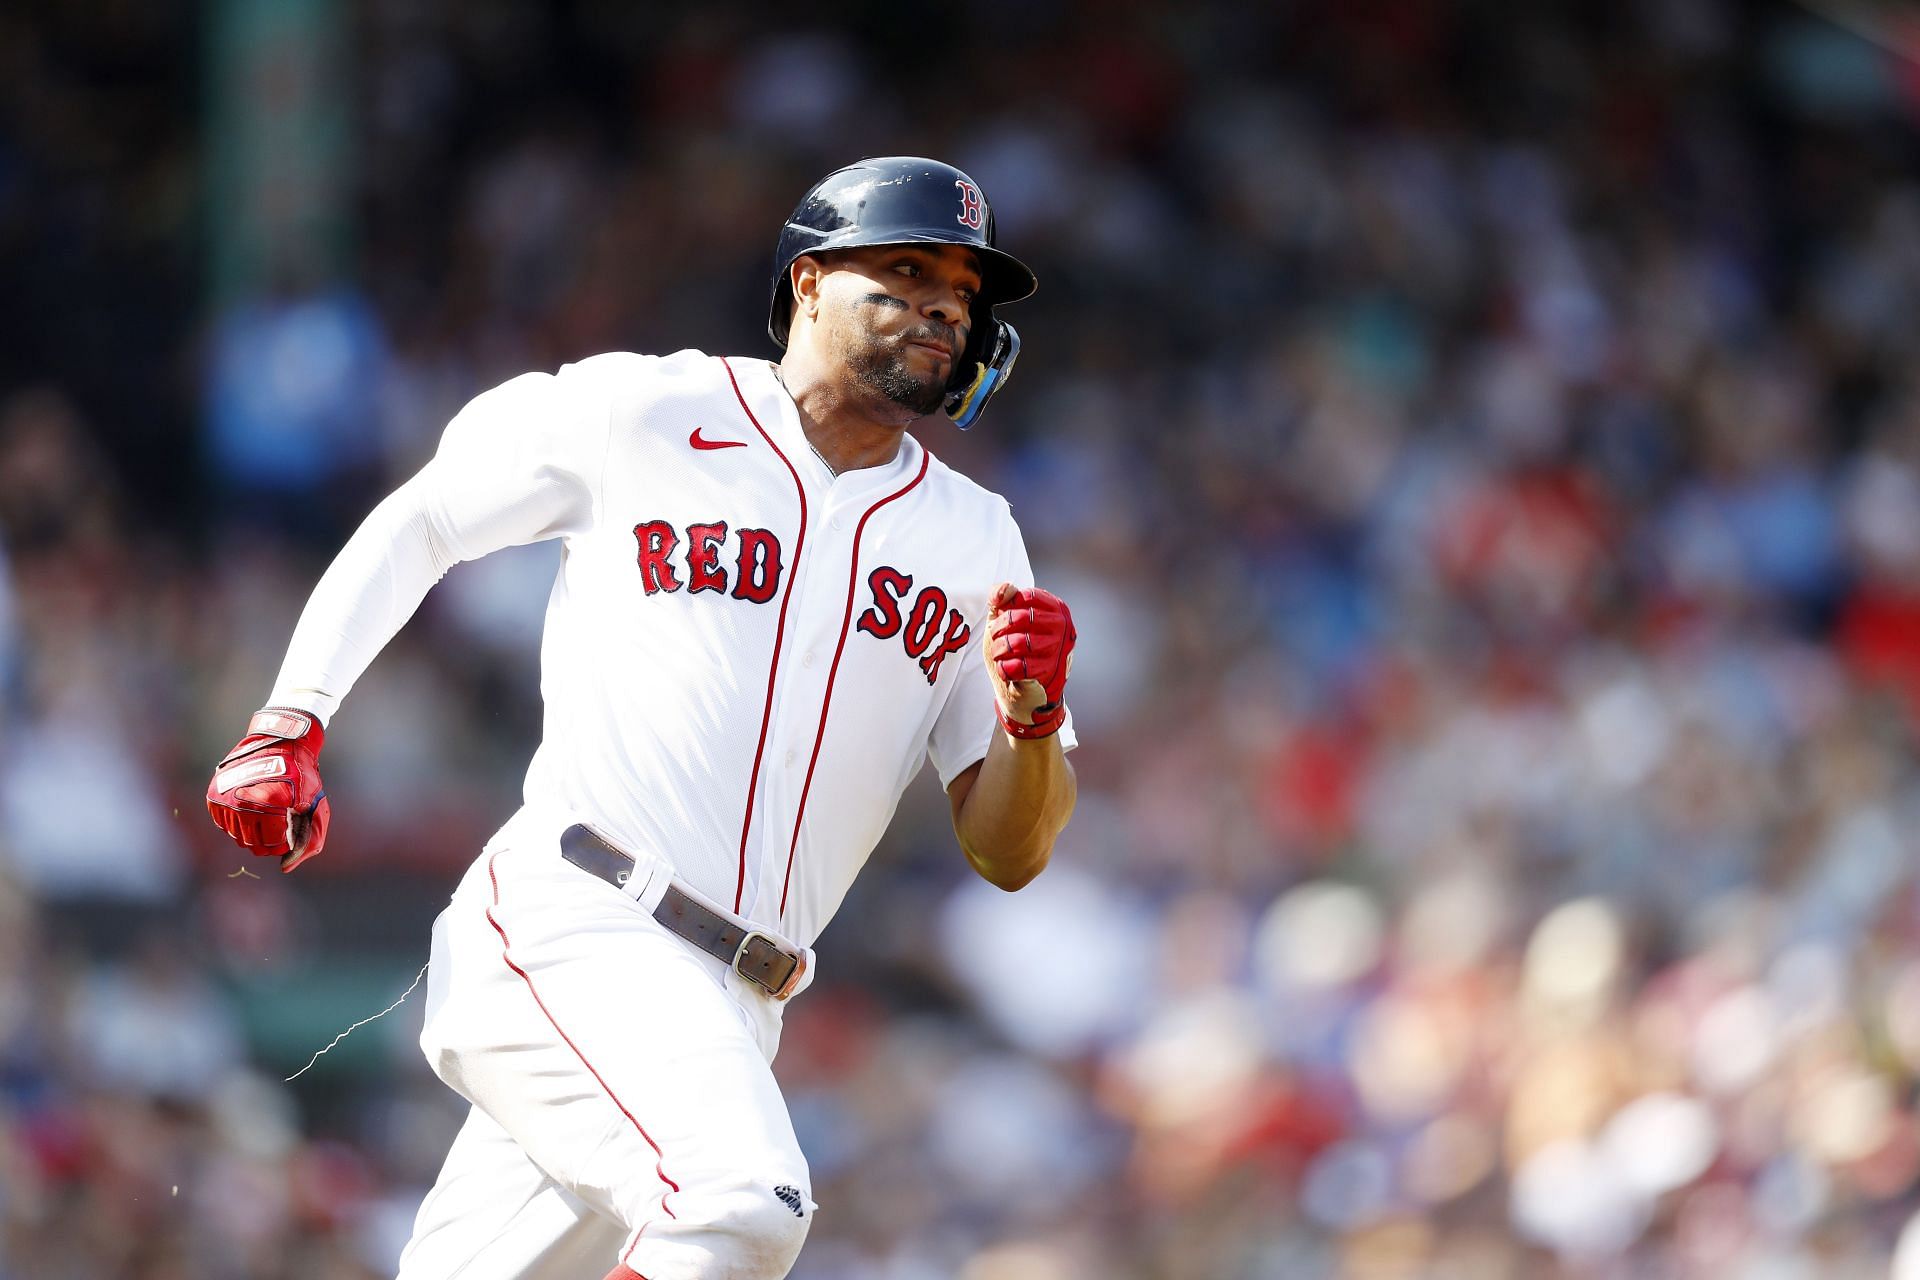 Xander Bogaerts rounds first base after hitting an RBI double in a game against the Kansas City Royals at Fenway Park